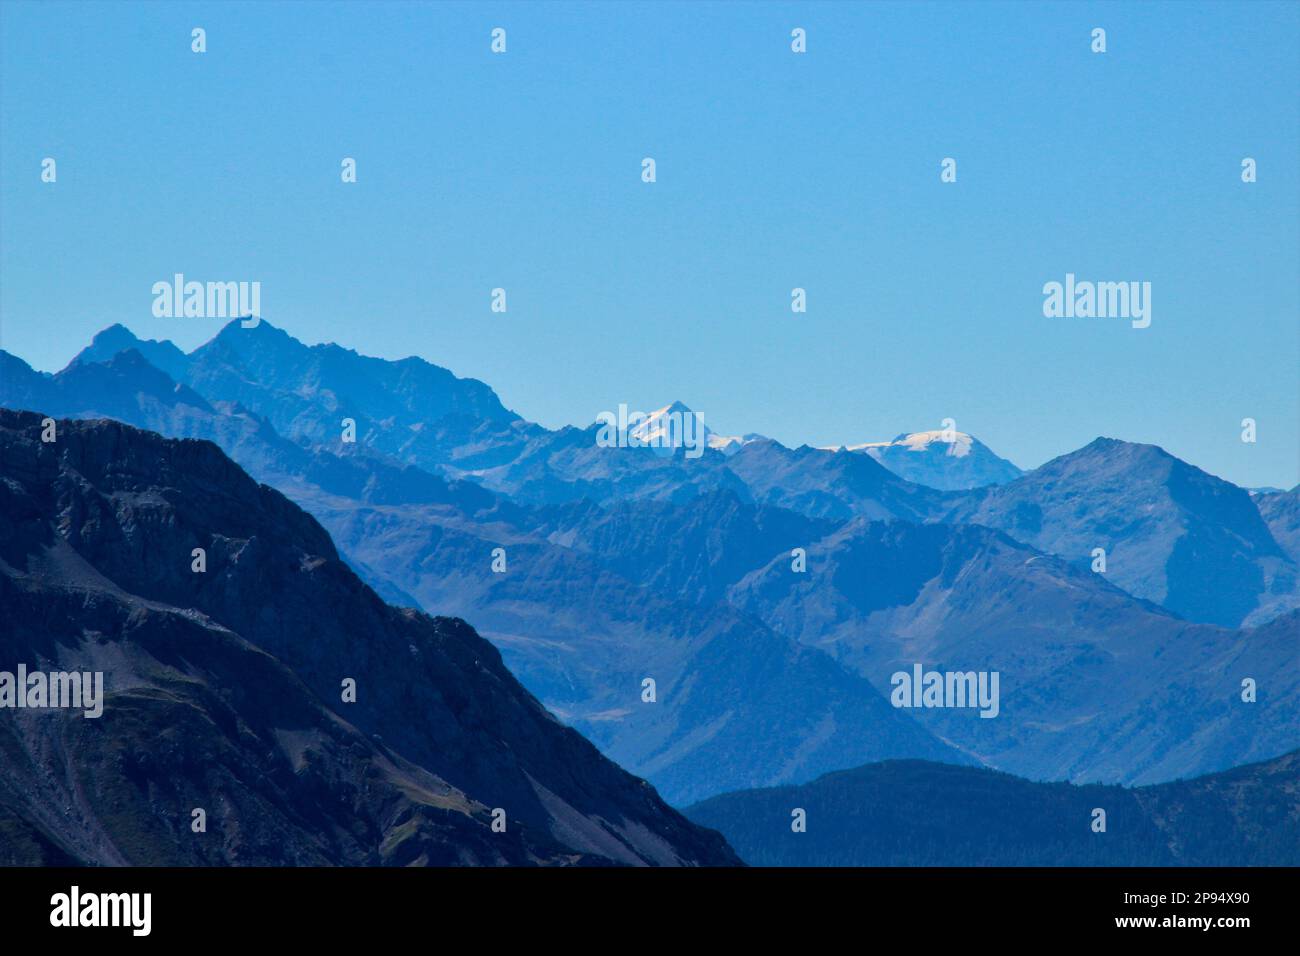 View from the summit of Daniel (2340m), highest peak of the Ammergau Alps, to the glacier-covered neighboring peaks, Lermoos, Zugspitzarena, Tyrol, Austria Stock Photo